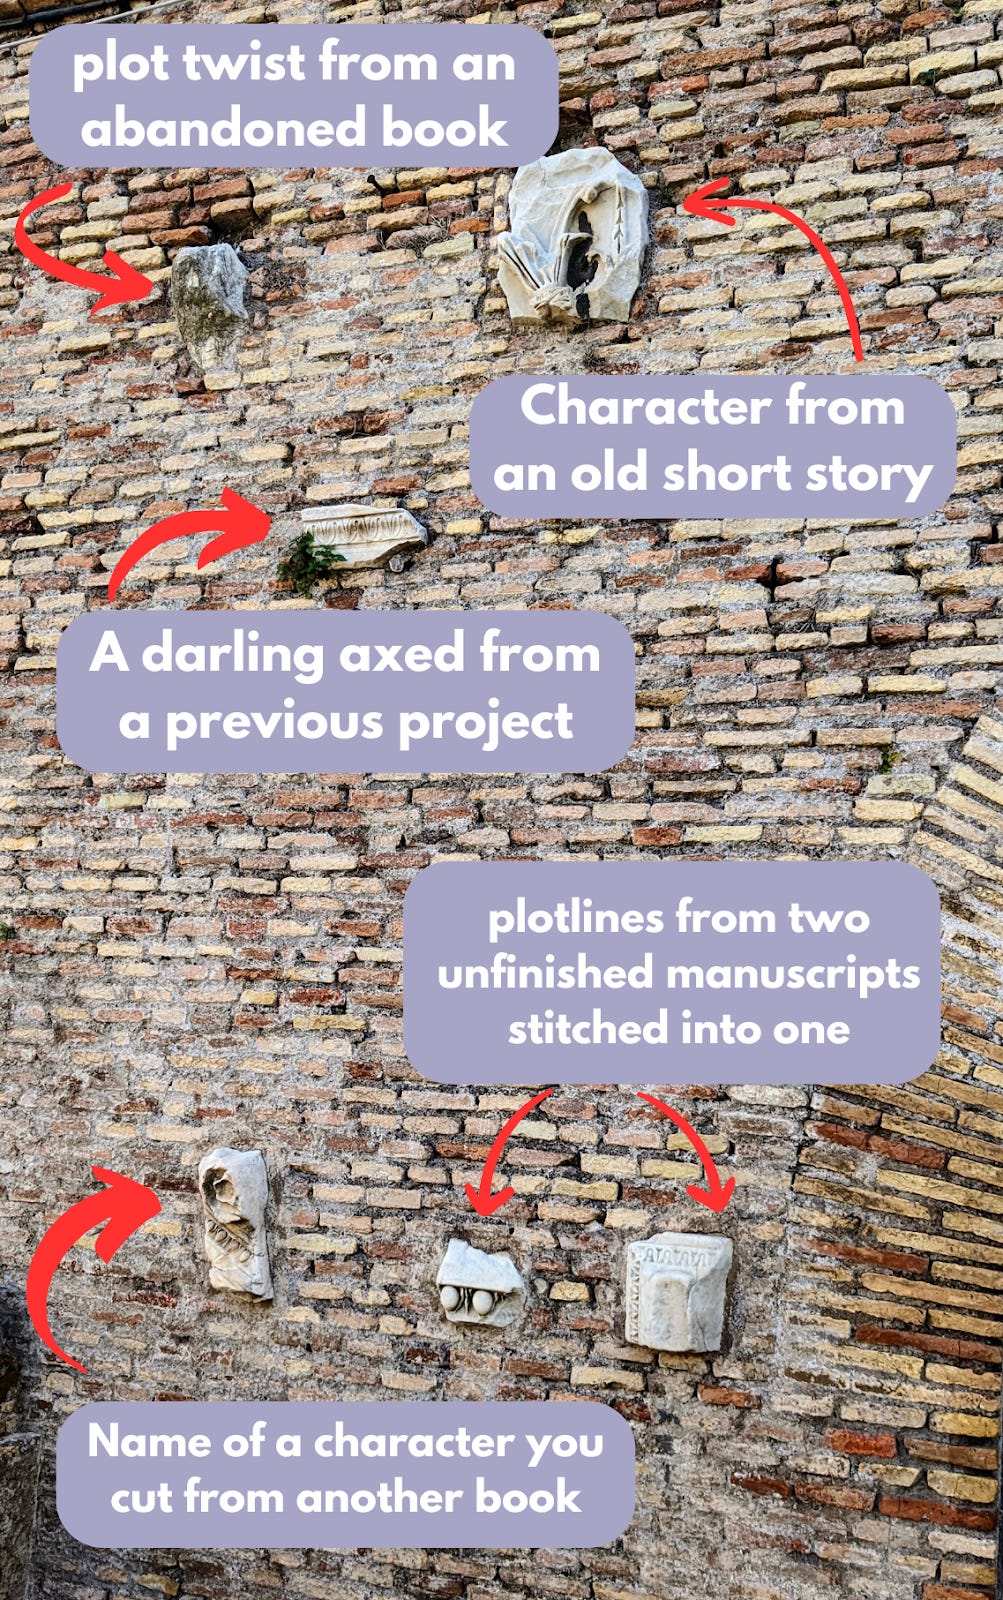 A brick wall built with pieces of ancient Roman marble right alongside the brick. Each chunk of marble is labeled, “plot twist from an abandoned book,” or “character from an old short story,” or “a darling axed from a previous project,” or “plotlines from two manuscripts stitched into one,” or “name of a character you cut from another book.”